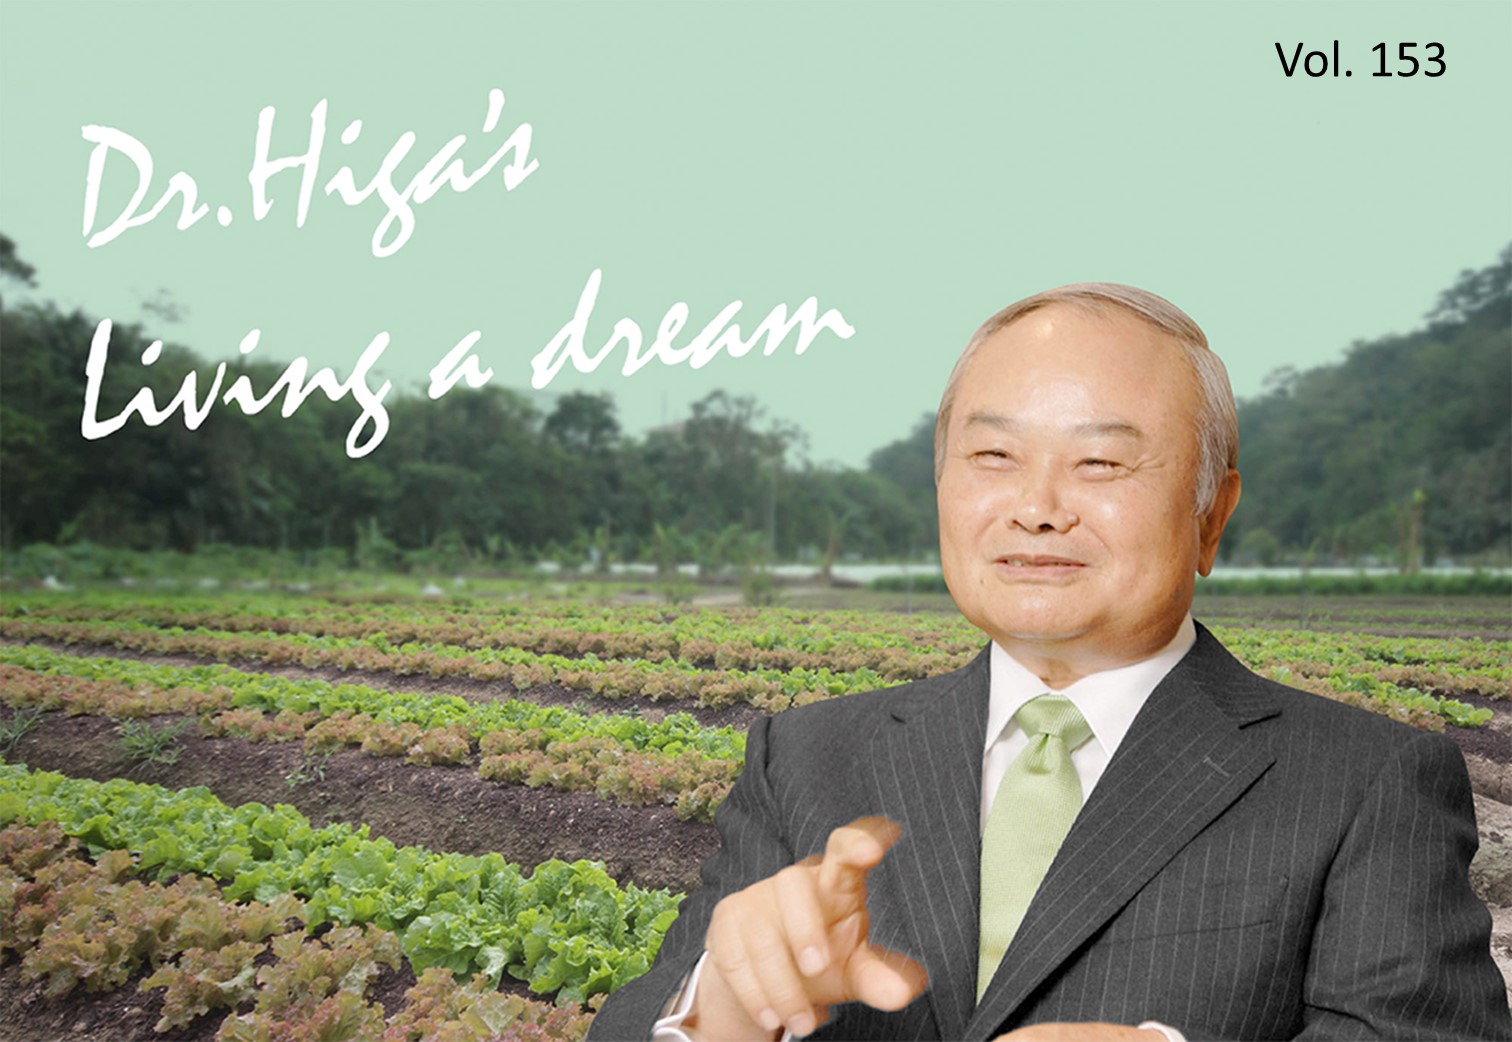 Dr. Higa's "Living a Dream": The latest article #153 is up!